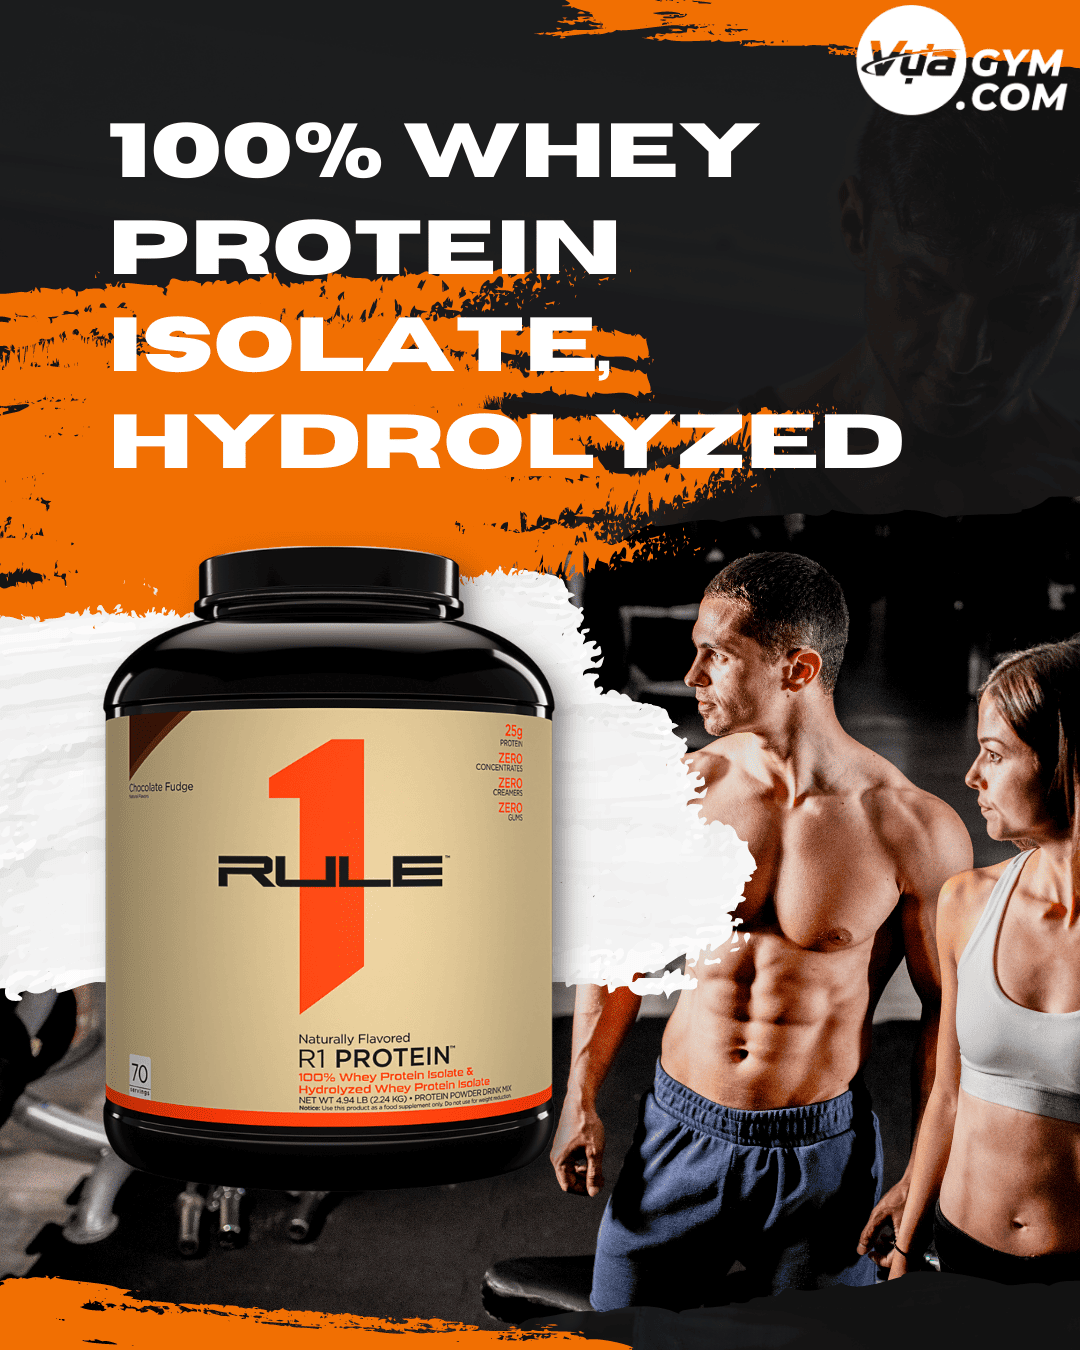 Rule 1 - R1 Protein Naturally Flavored (4.3 - 5 Lbs) - rule 1 r1 protein naturally flavored 49 5 lbs mota vuagym 2